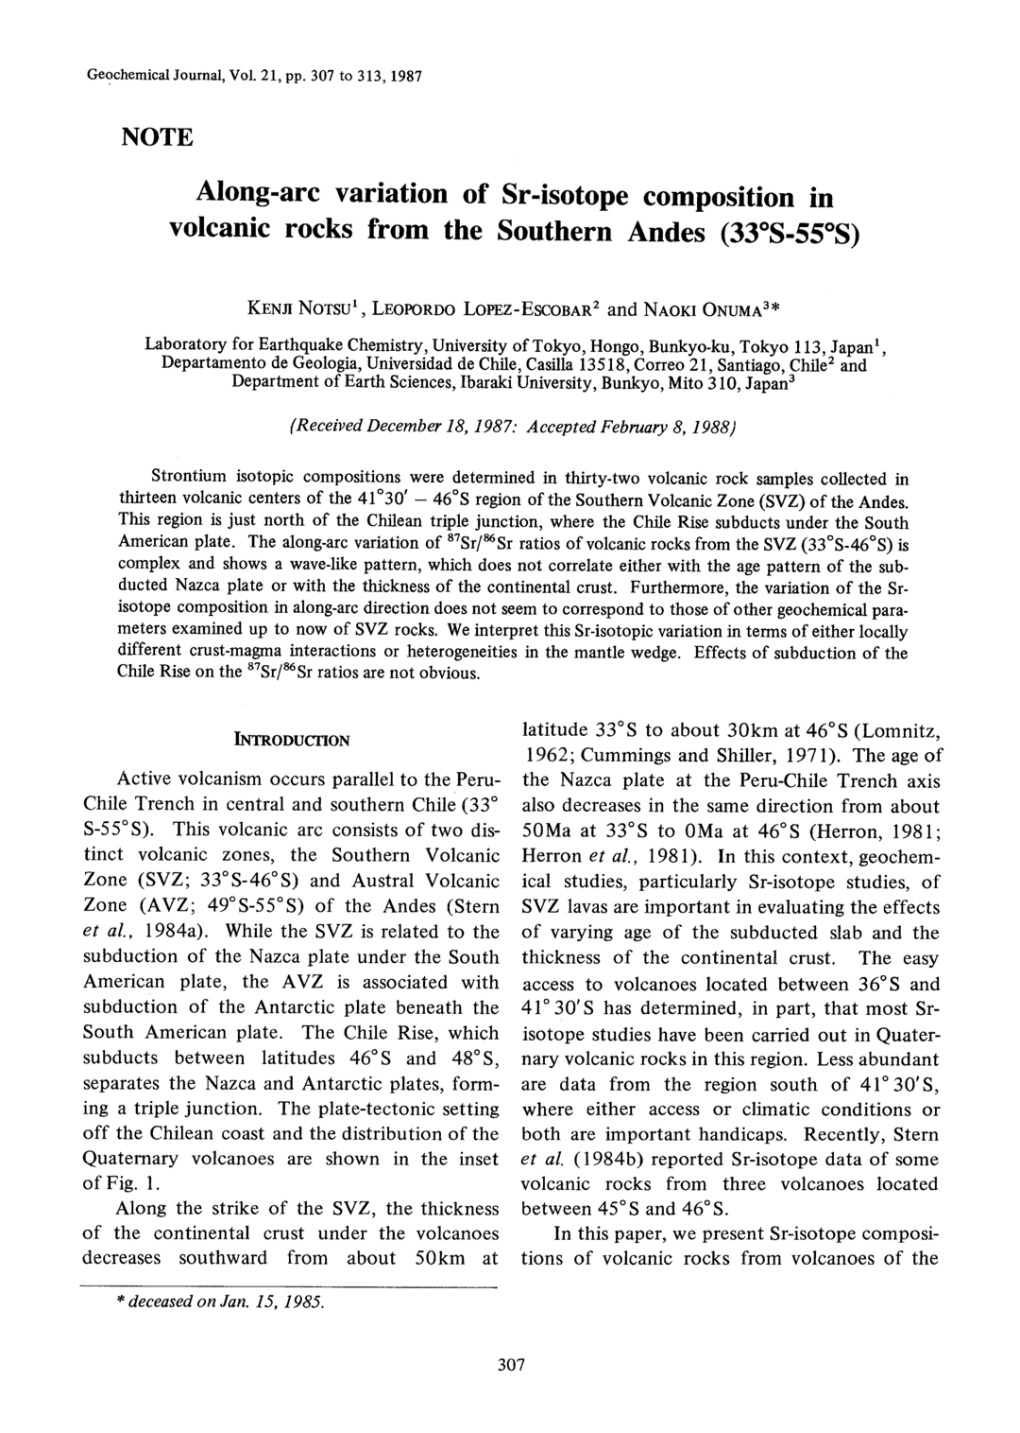 Sr-Isotope Composition in Southern Andes